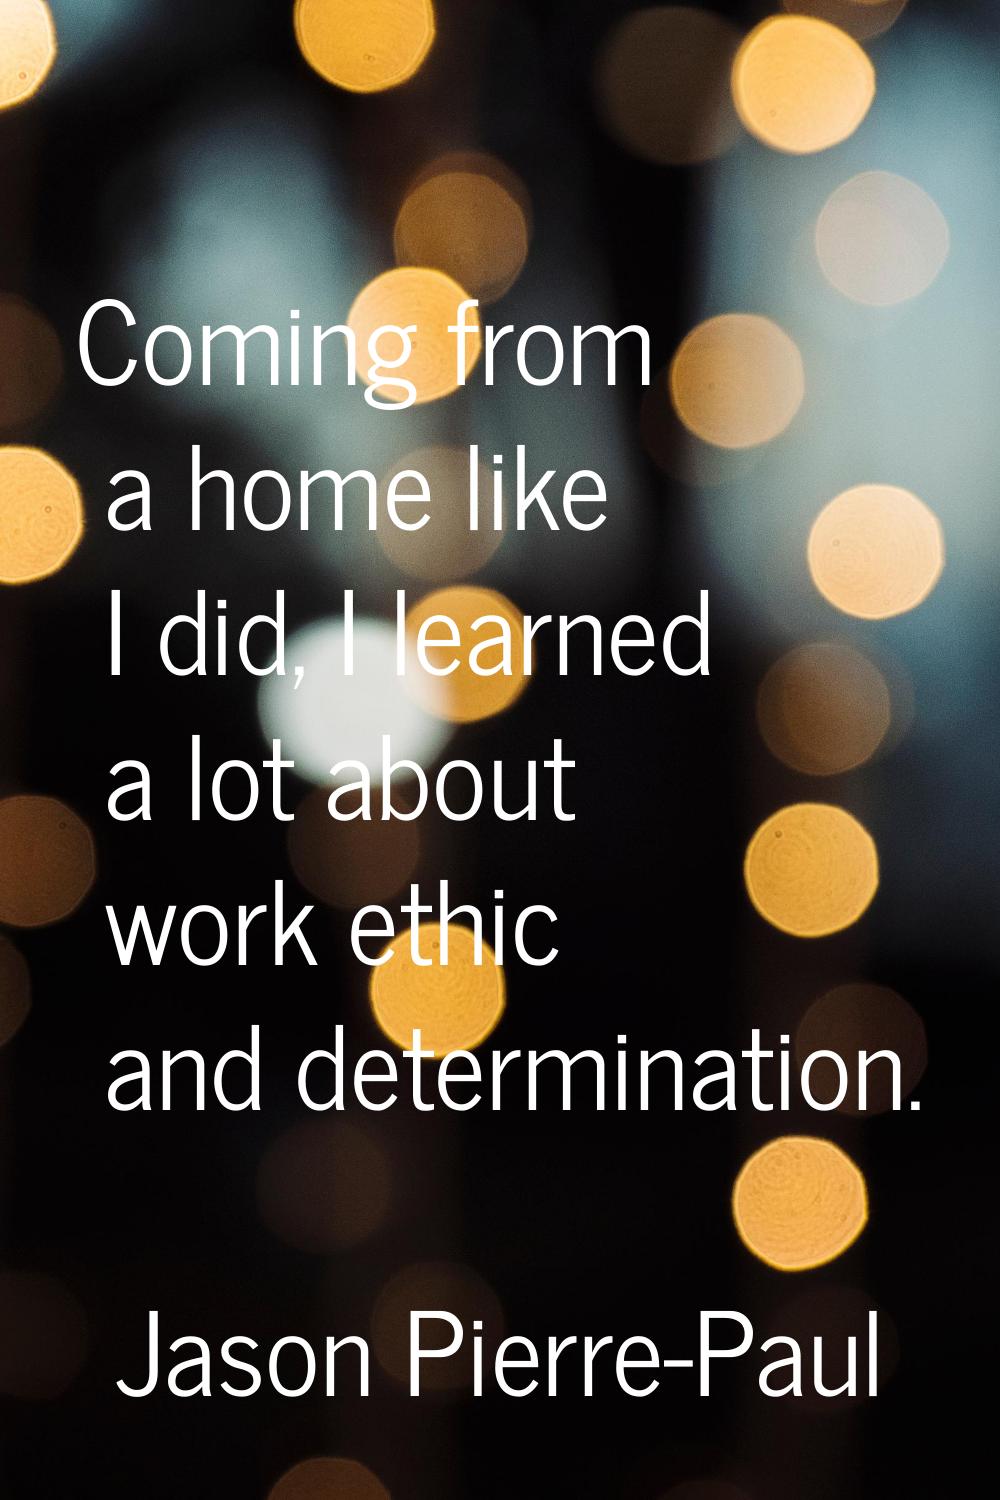 Coming from a home like I did, I learned a lot about work ethic and determination.